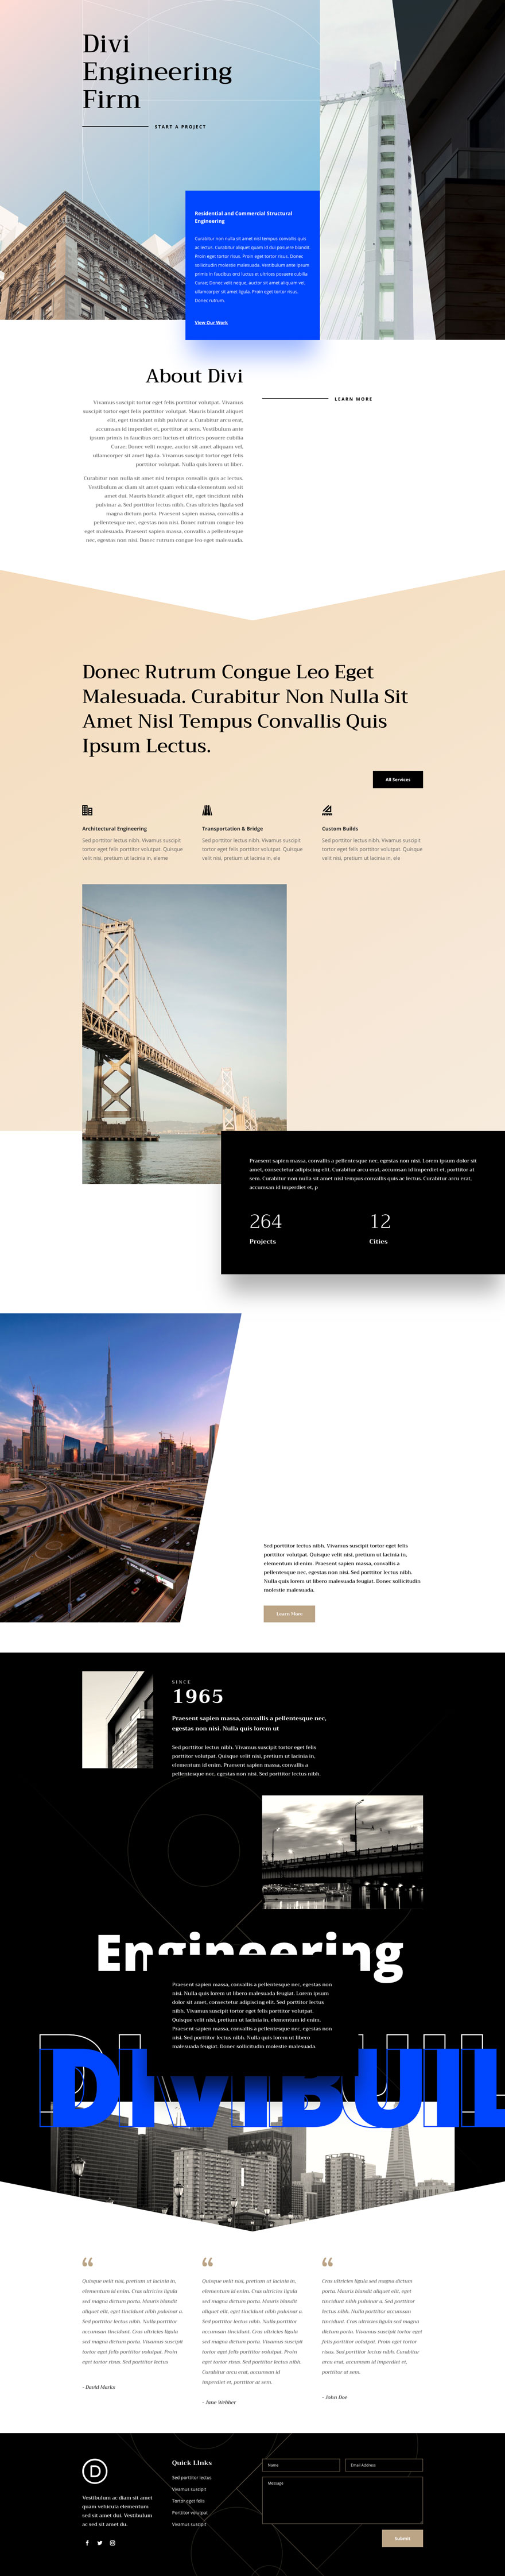 Page/ – Design, Architecture, Engineering